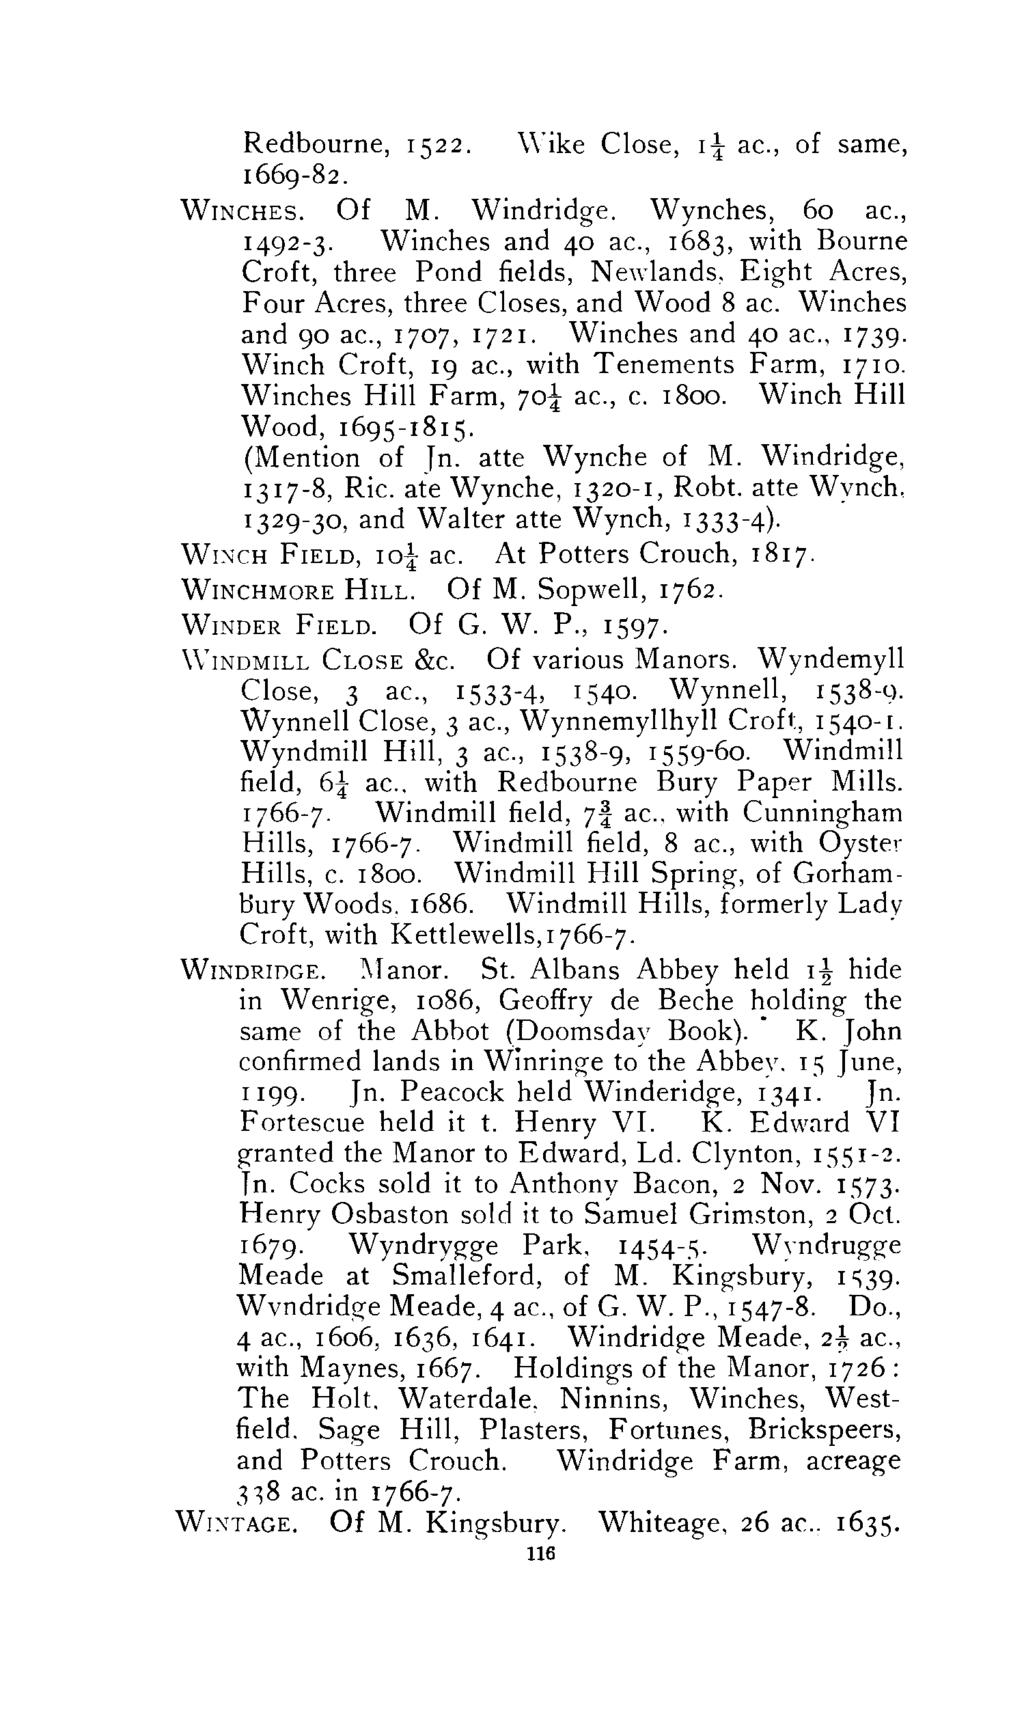 Redbourne, 1522. Wike Close,11/4ac., of same, 1669-82. Winches. Of M. Windridge. Wynches, 60 ac., 1492-3. Winches and 40 ac.